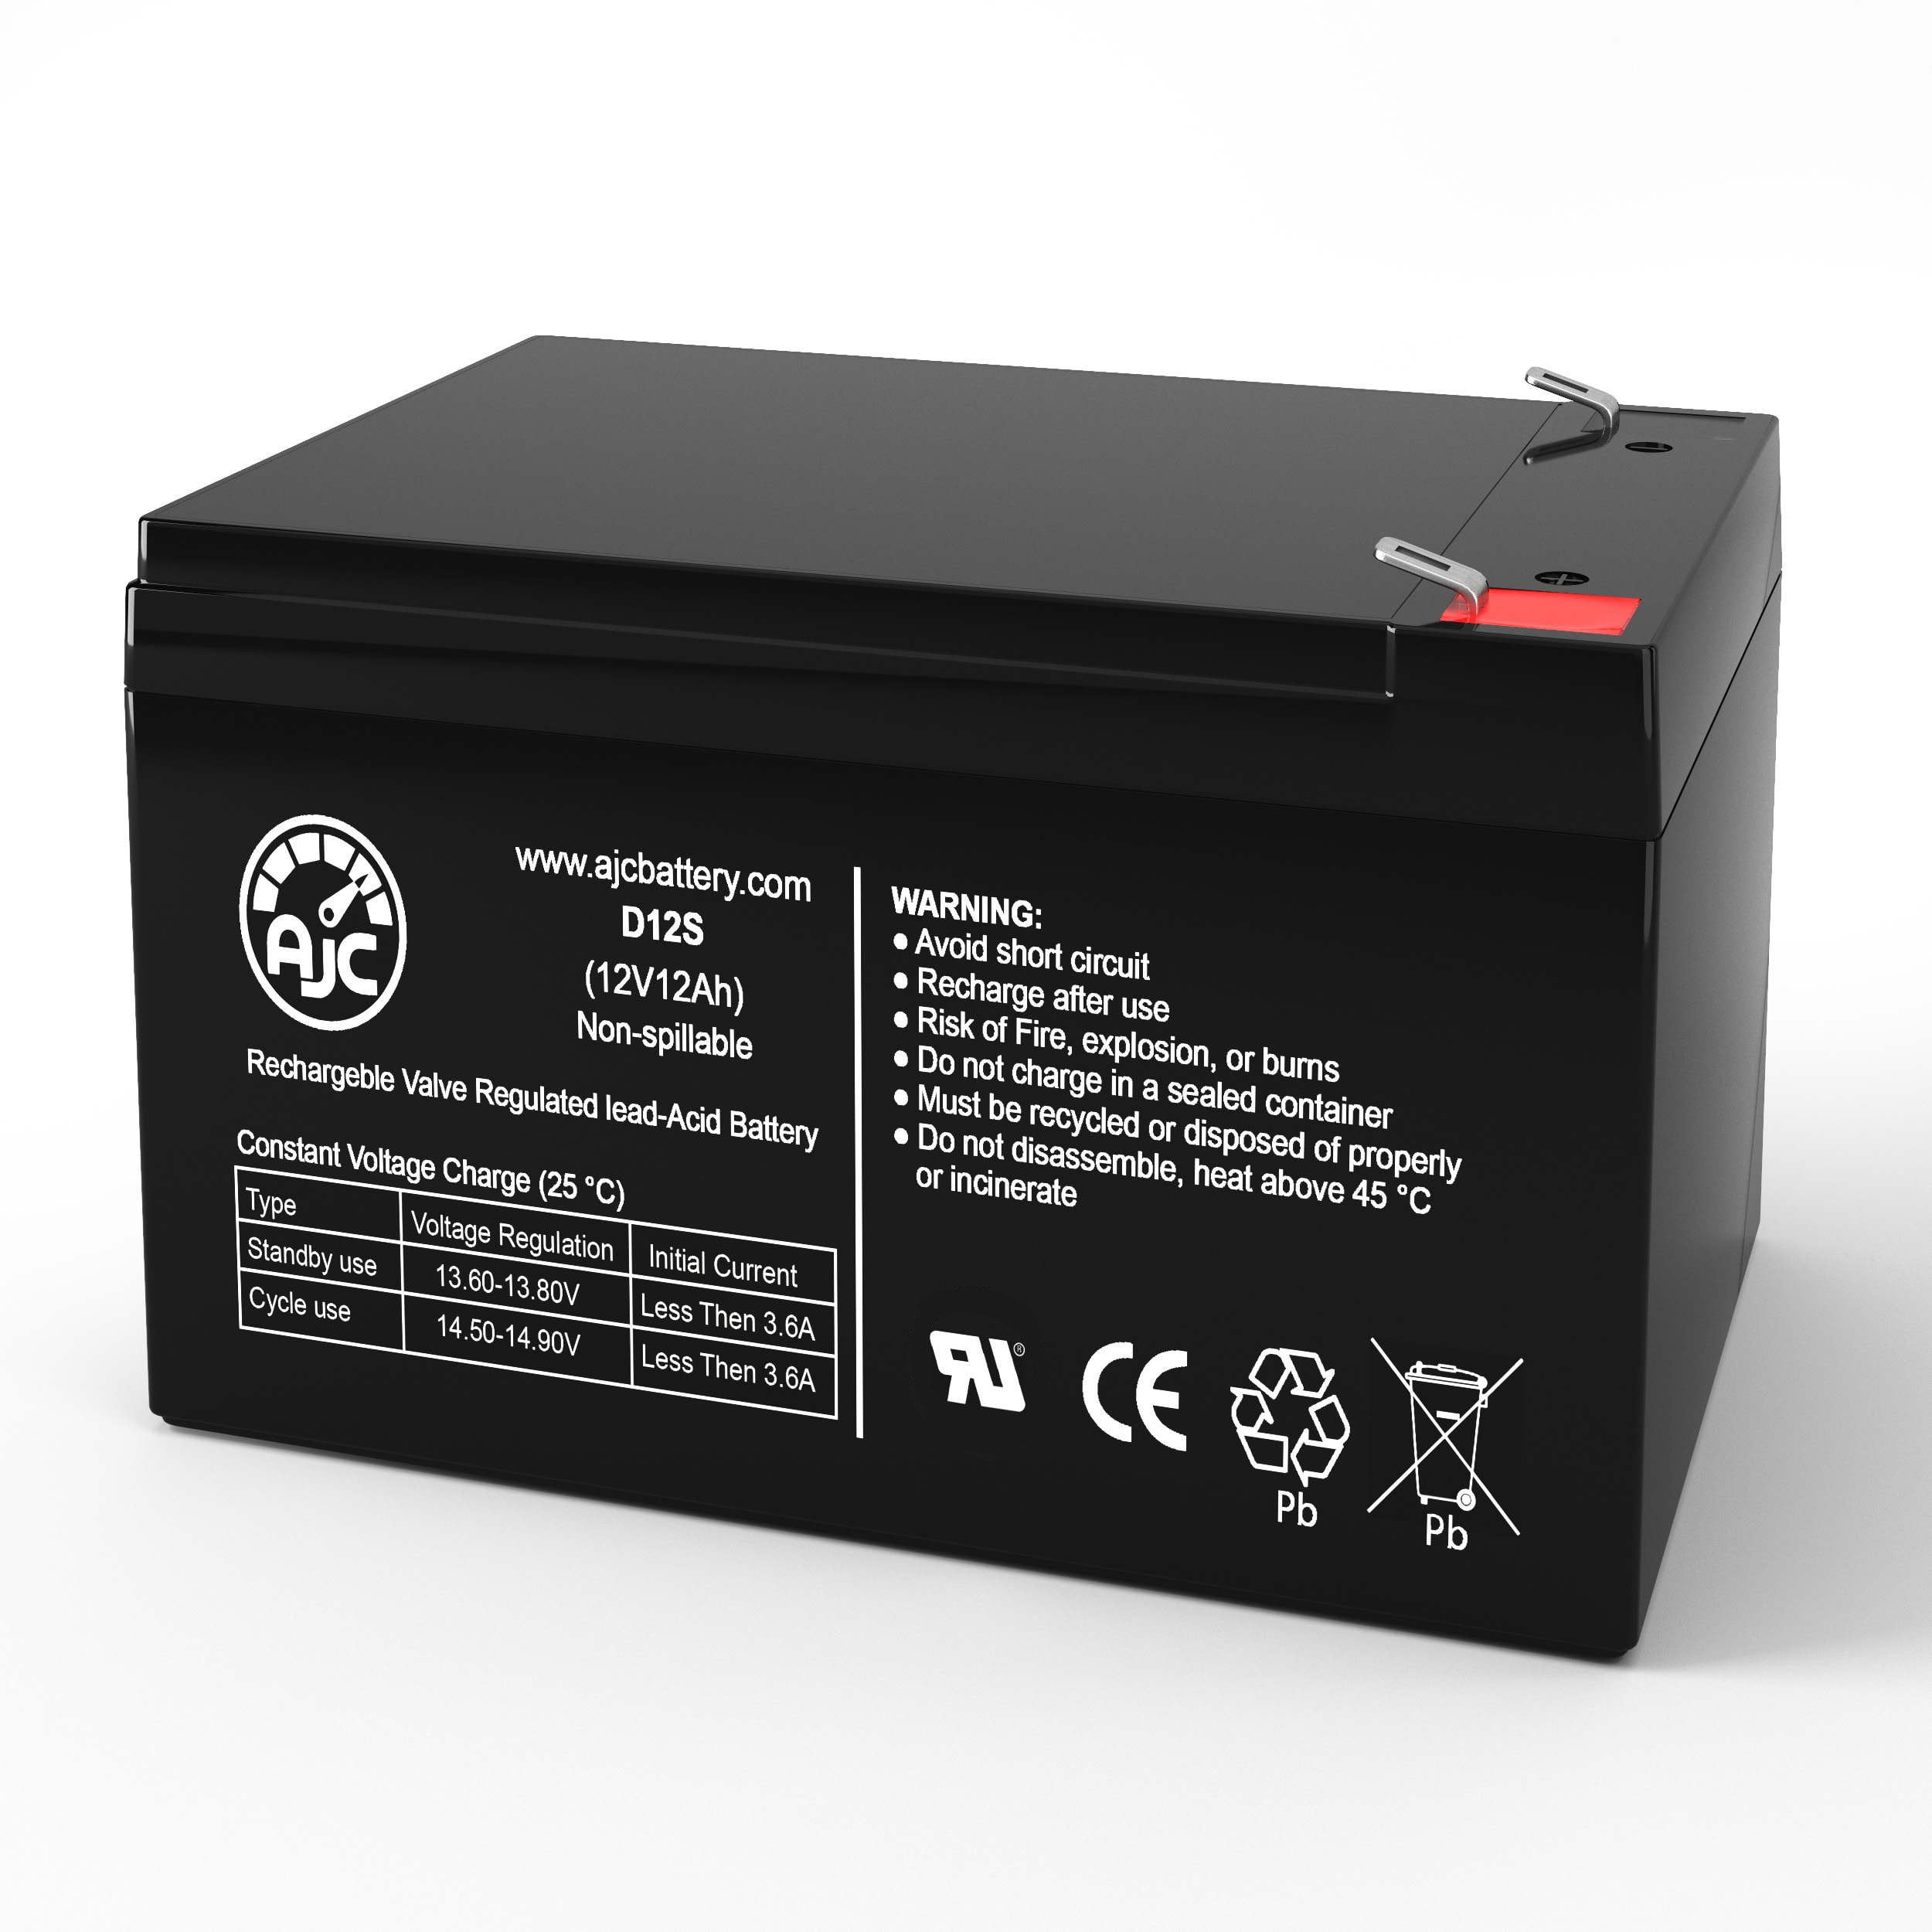 Invloed trompet Afkorting E-Scooter 36 Volt 350 Watt 12V 12Ah Electric Scooter Battery - This Is an  AJC Brand Replacement - Walmart.com